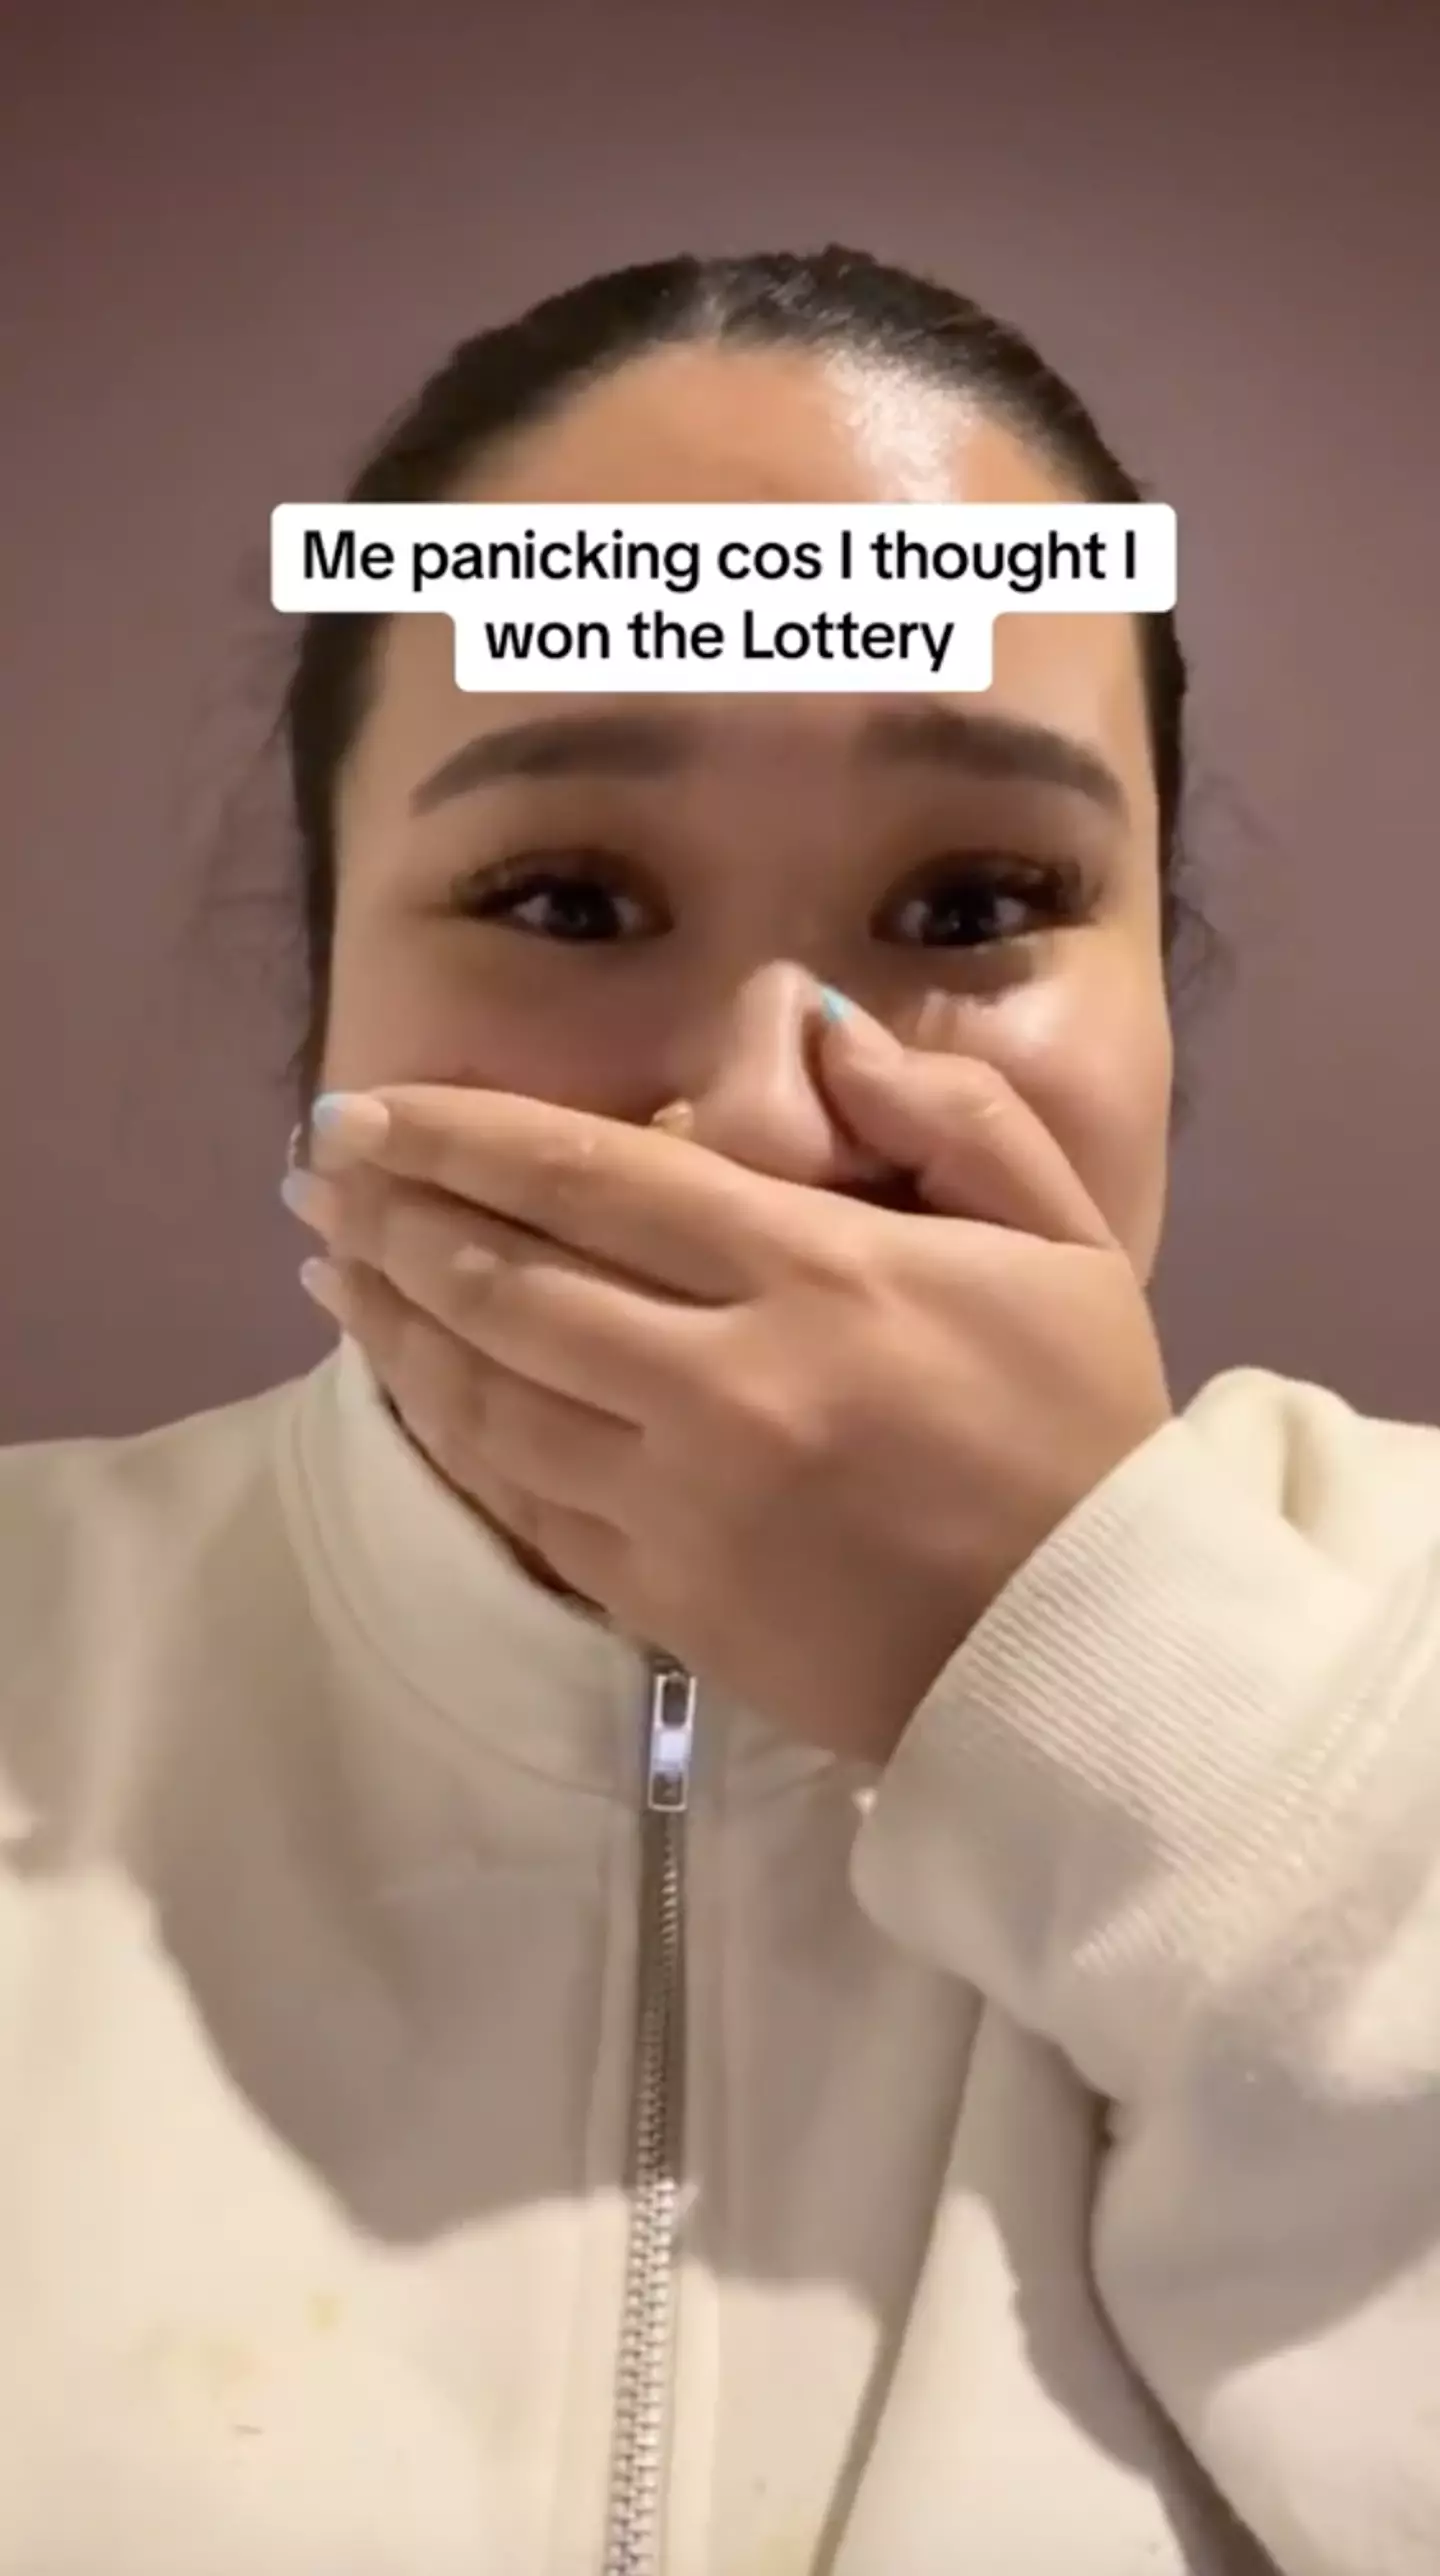 The Aussie woman was convinced she hit the £76 million ($100m AUD) jackpot.